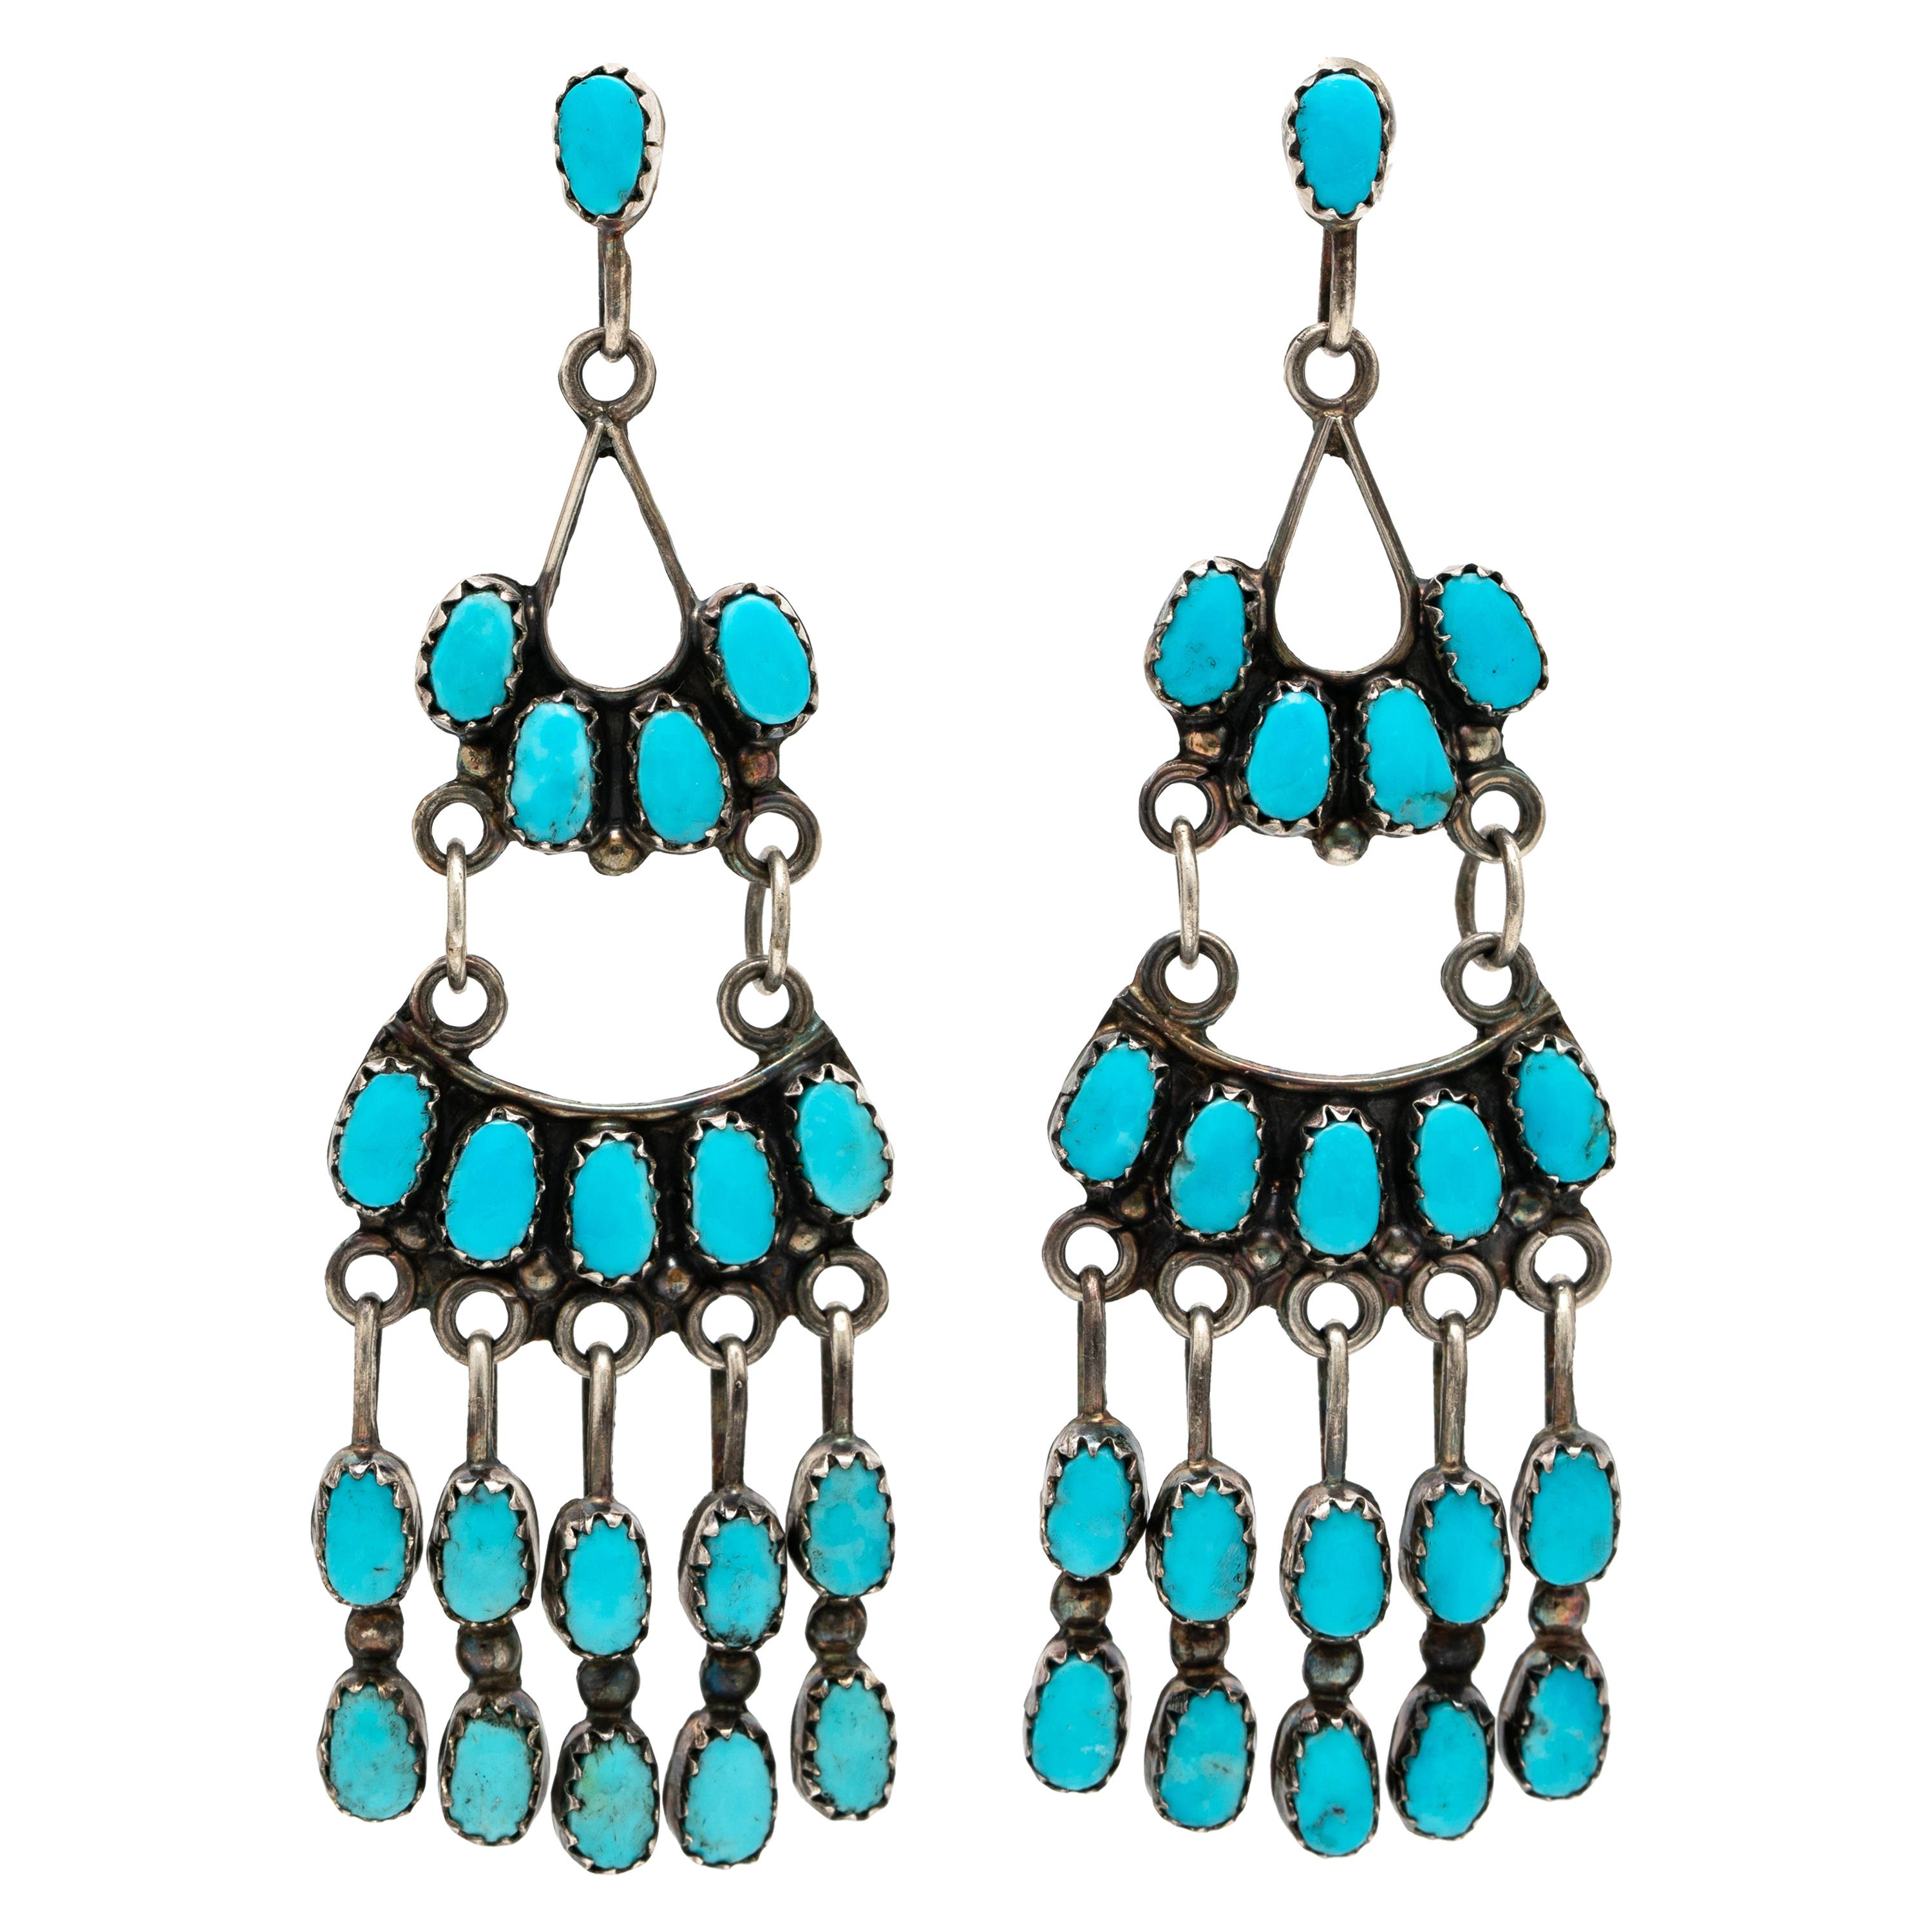 Signed Native American Zuni Silver and Turquoise Chandelier Earrings